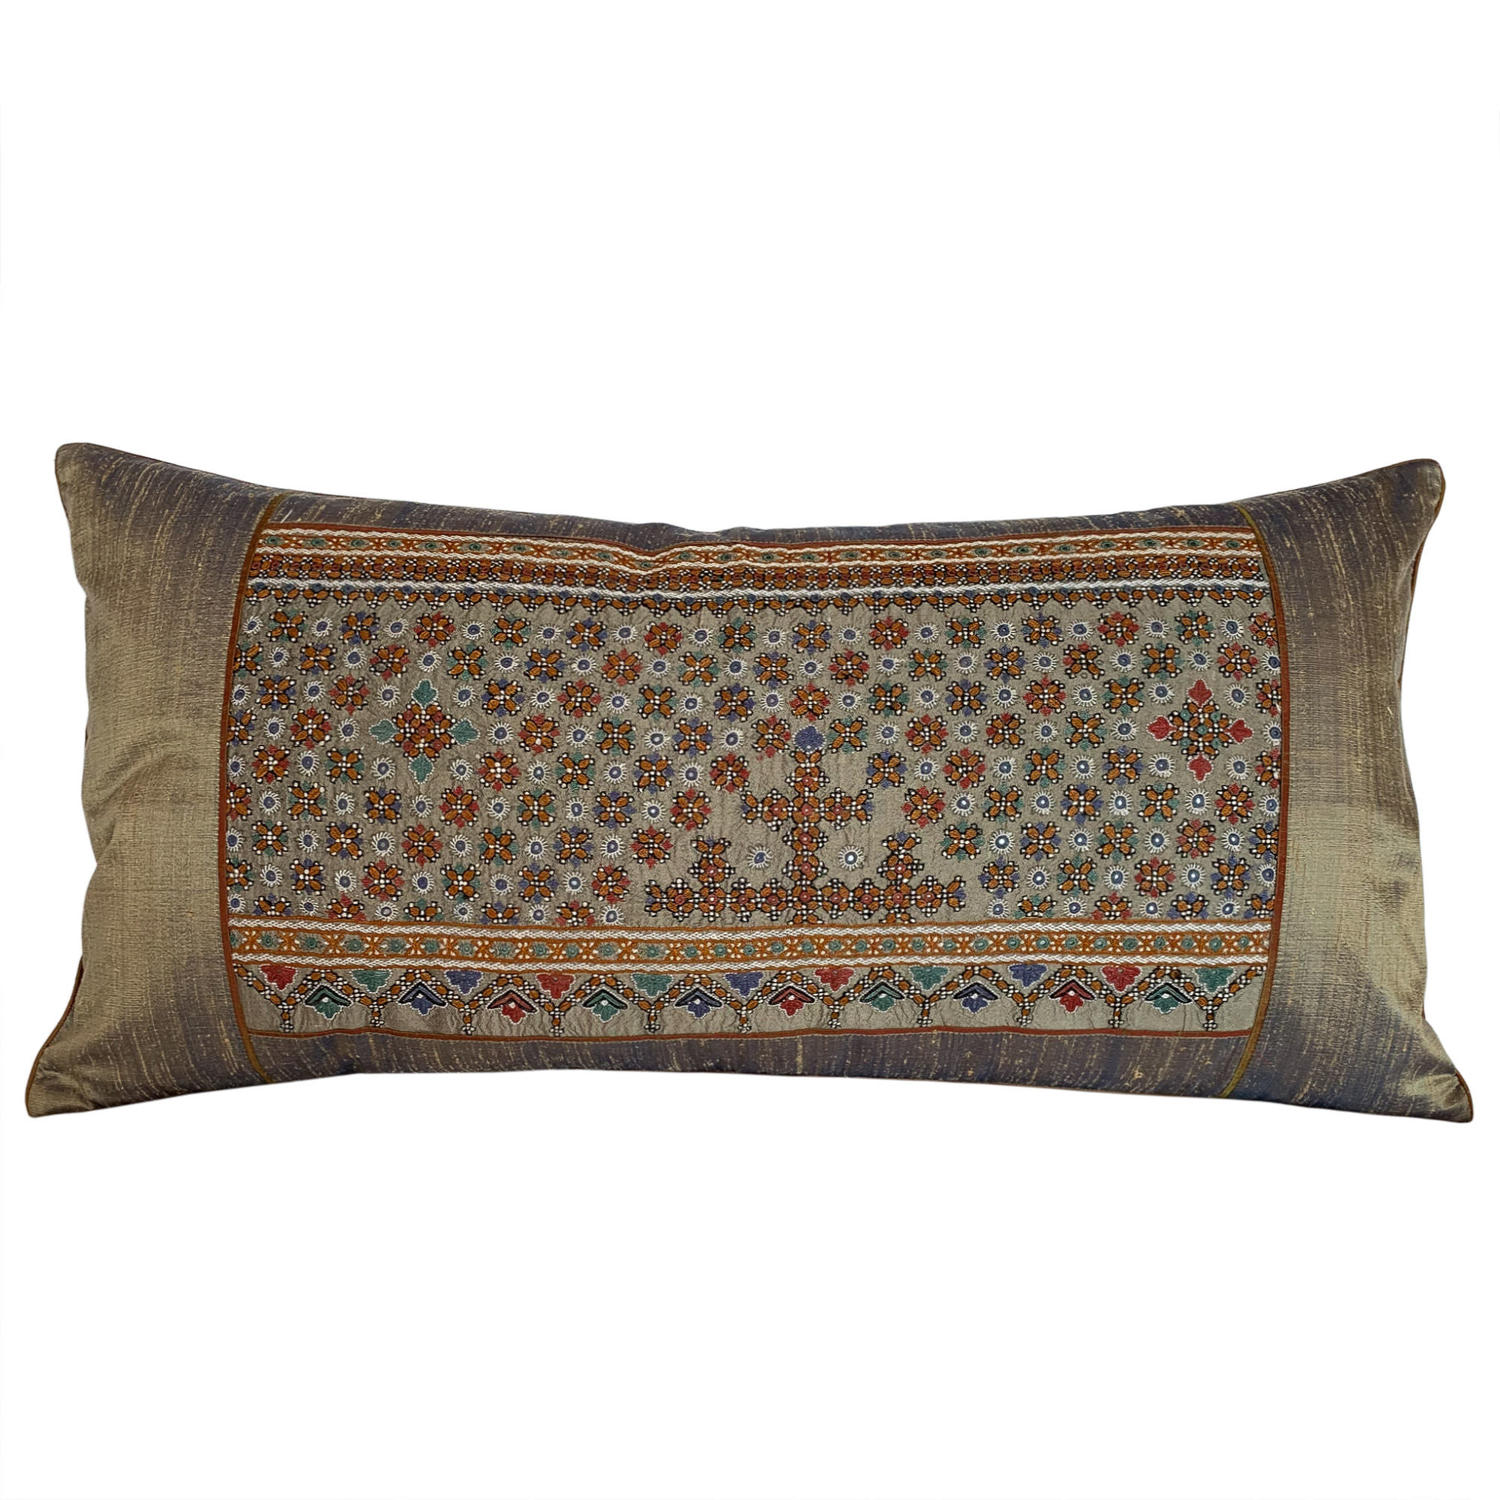 Shrujan hand embroidered cushions